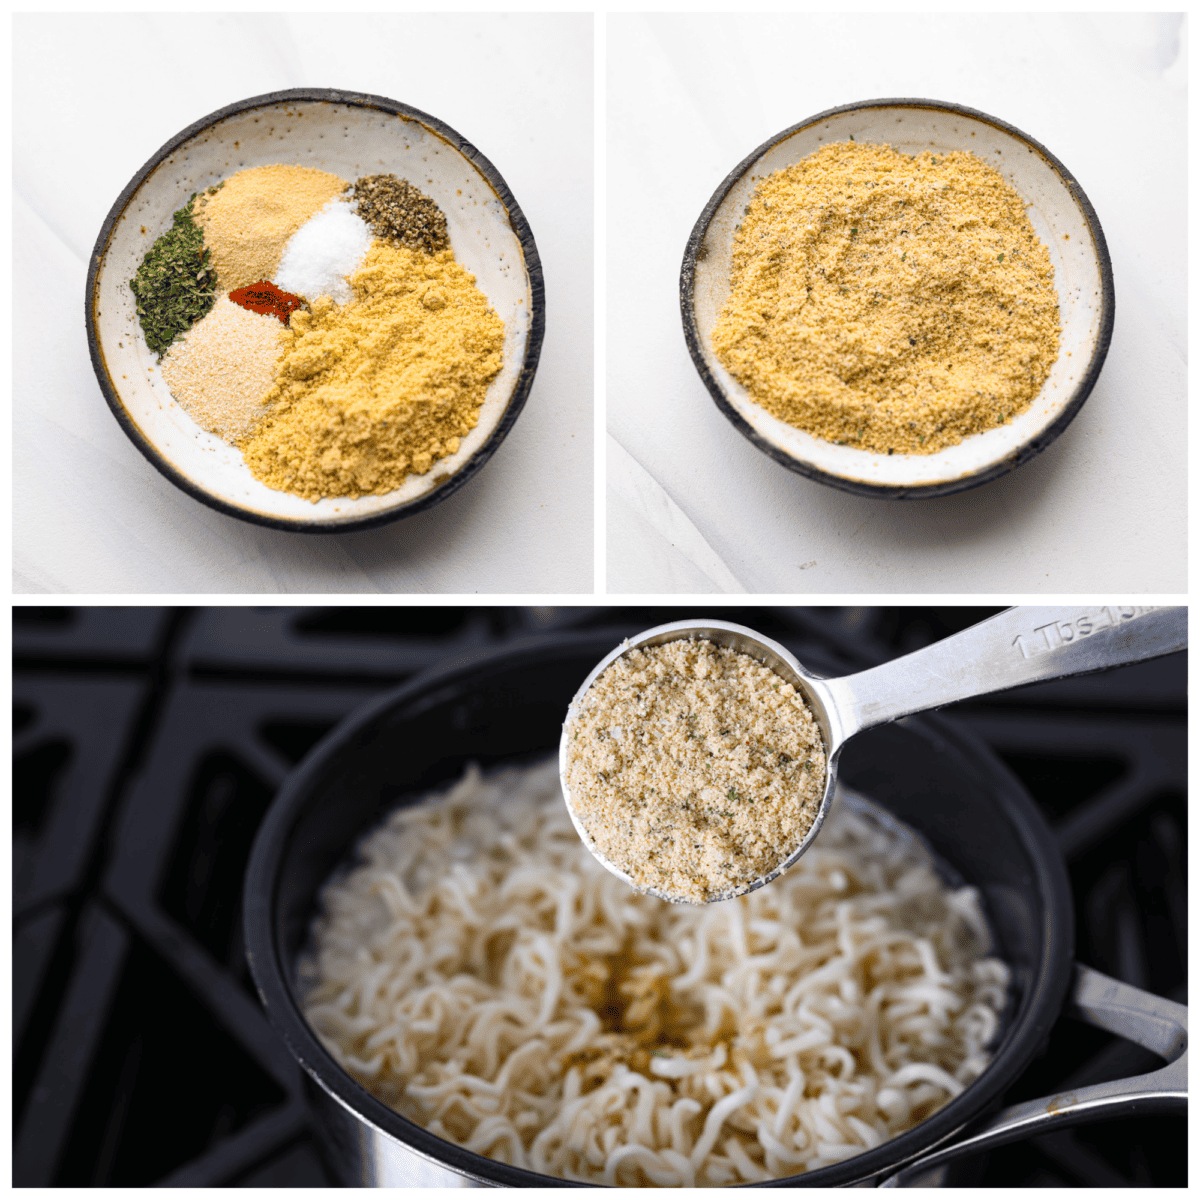 3-photo collage of the seasoning mixture being combined and added to Instant noodles.